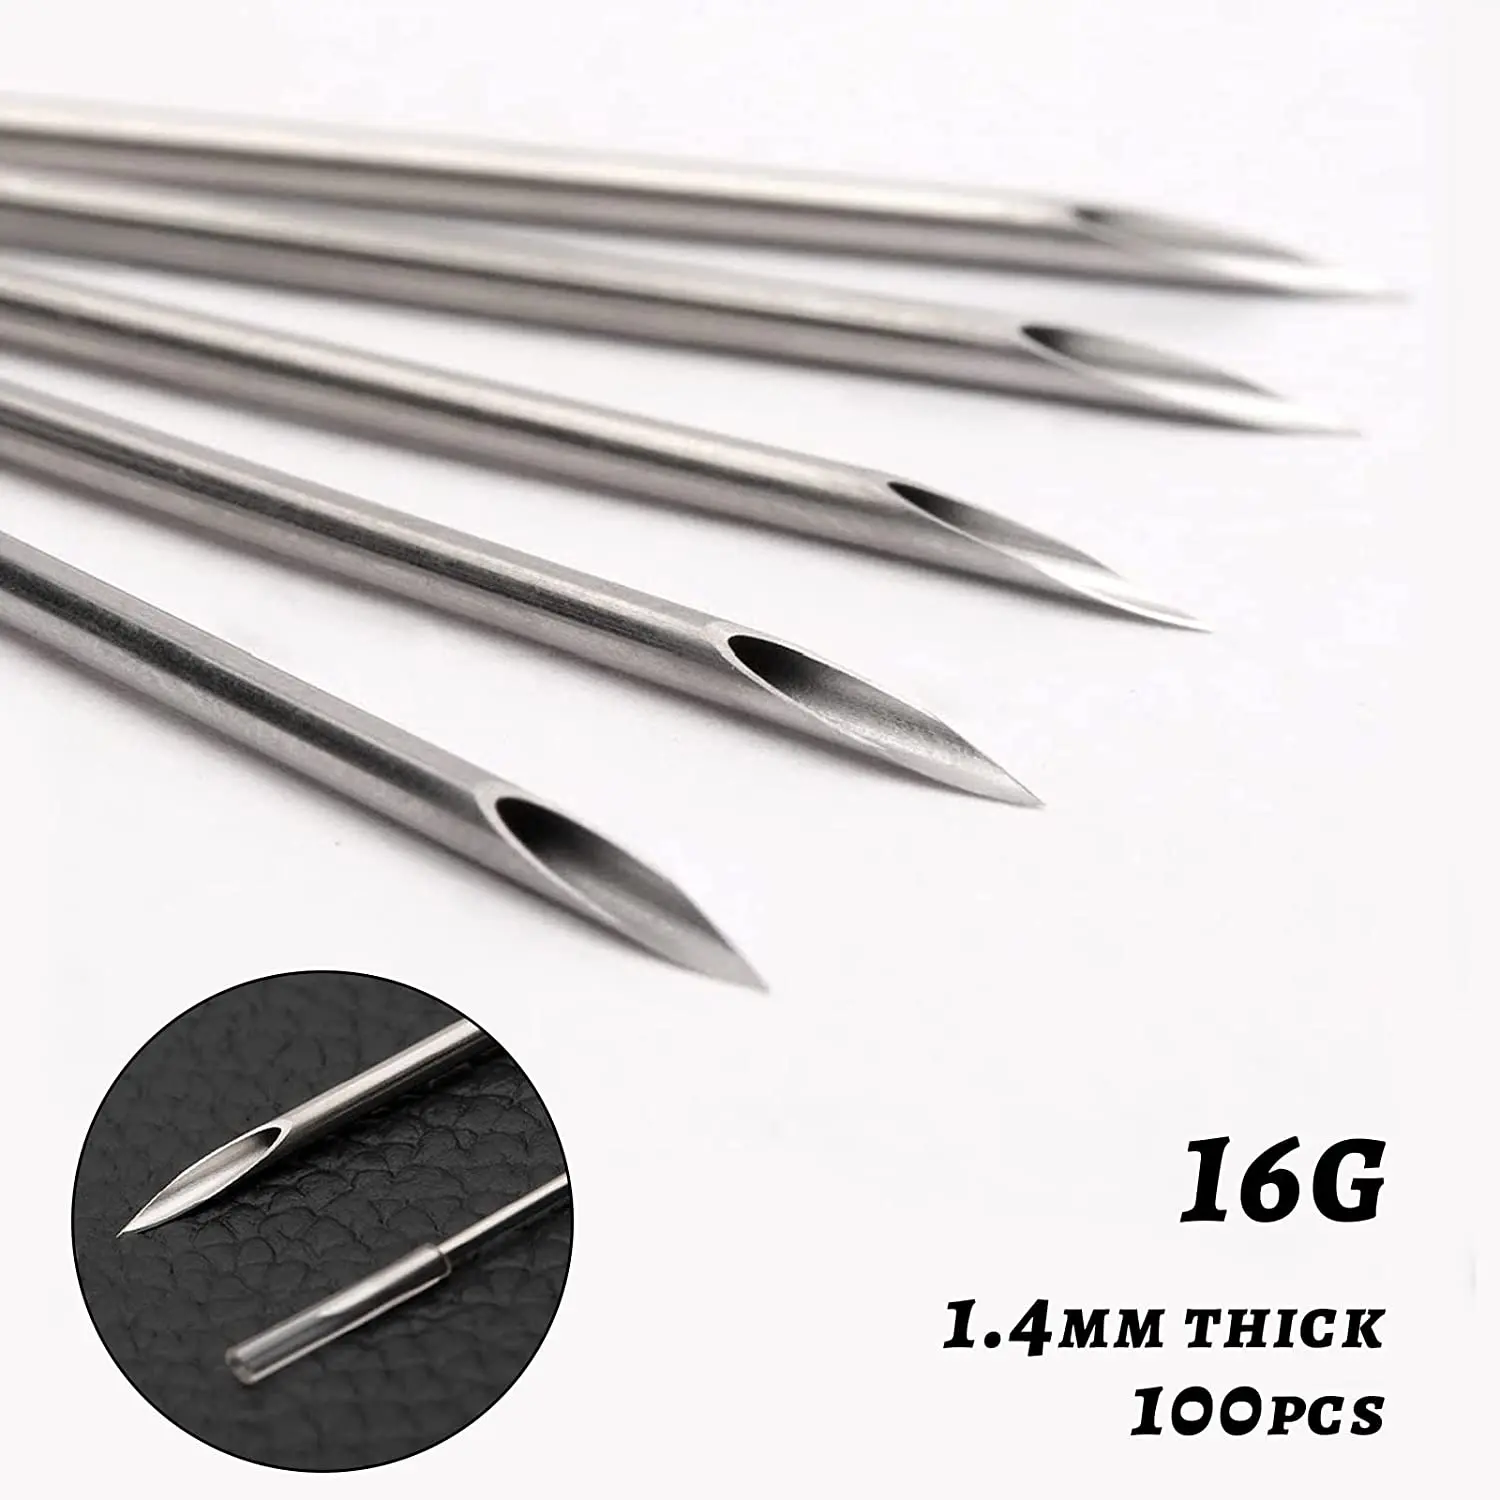 

12G 14G 16G 18G 20G 100PCS Disposable Stainless Steel Body Piercing Needles for Ear Nose Navel Belly Nipple Tongue Lip Pierc